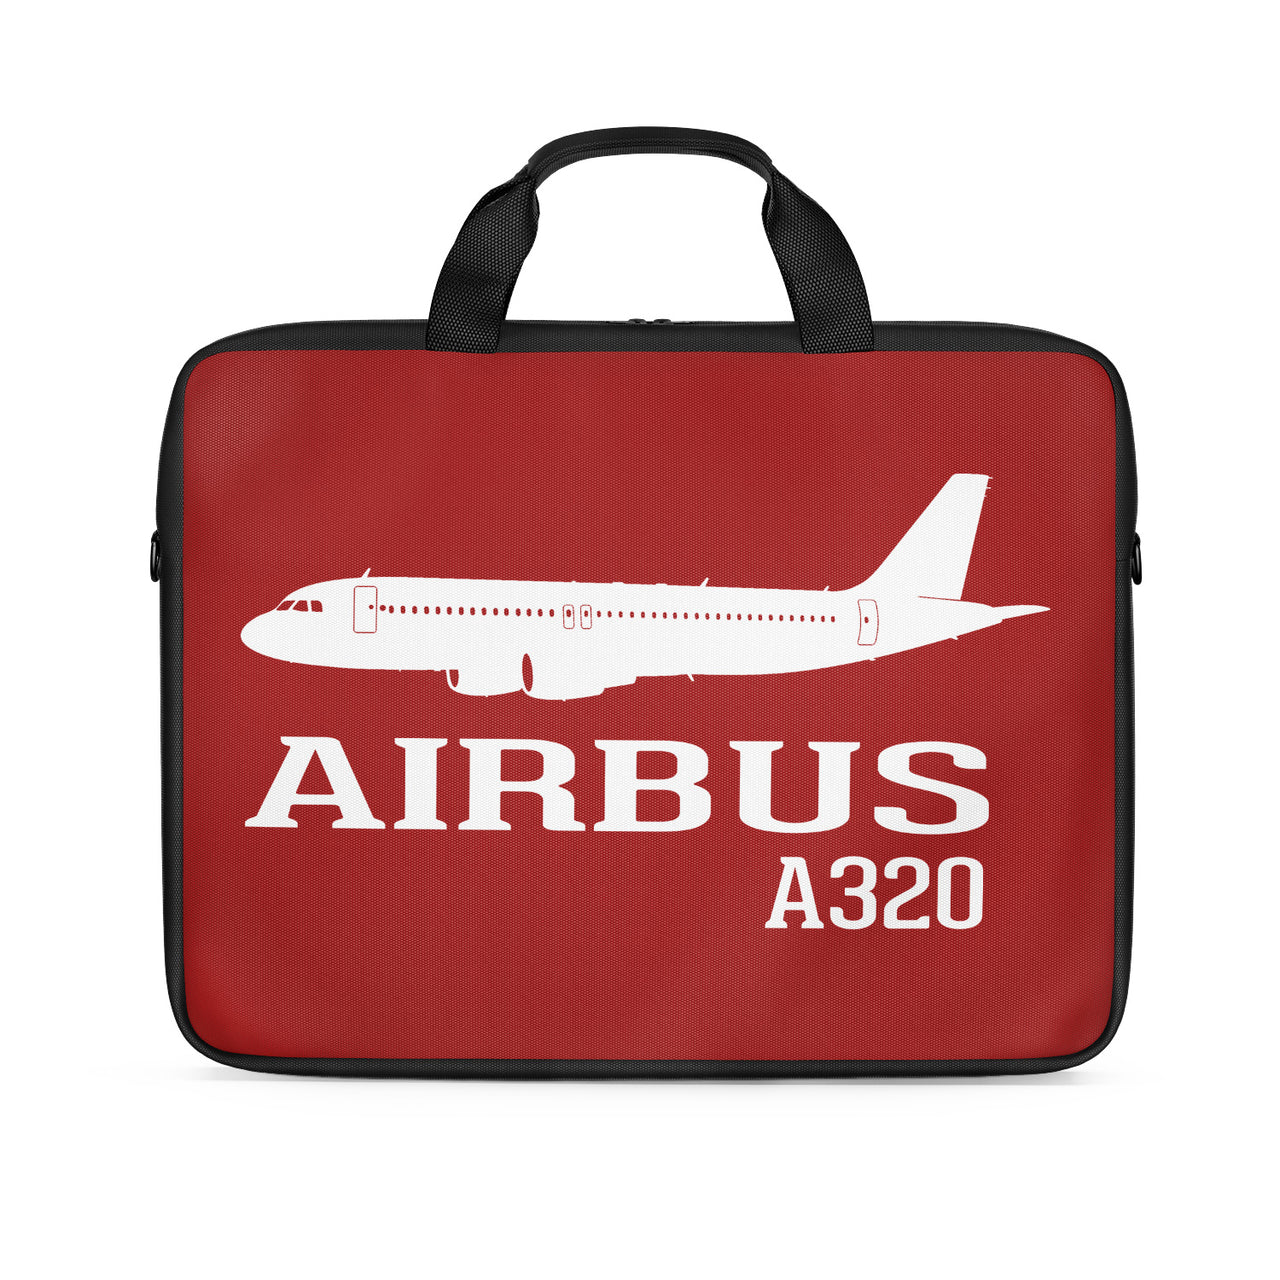 Airbus A320 Printed Designed Laptop & Tablet Bags